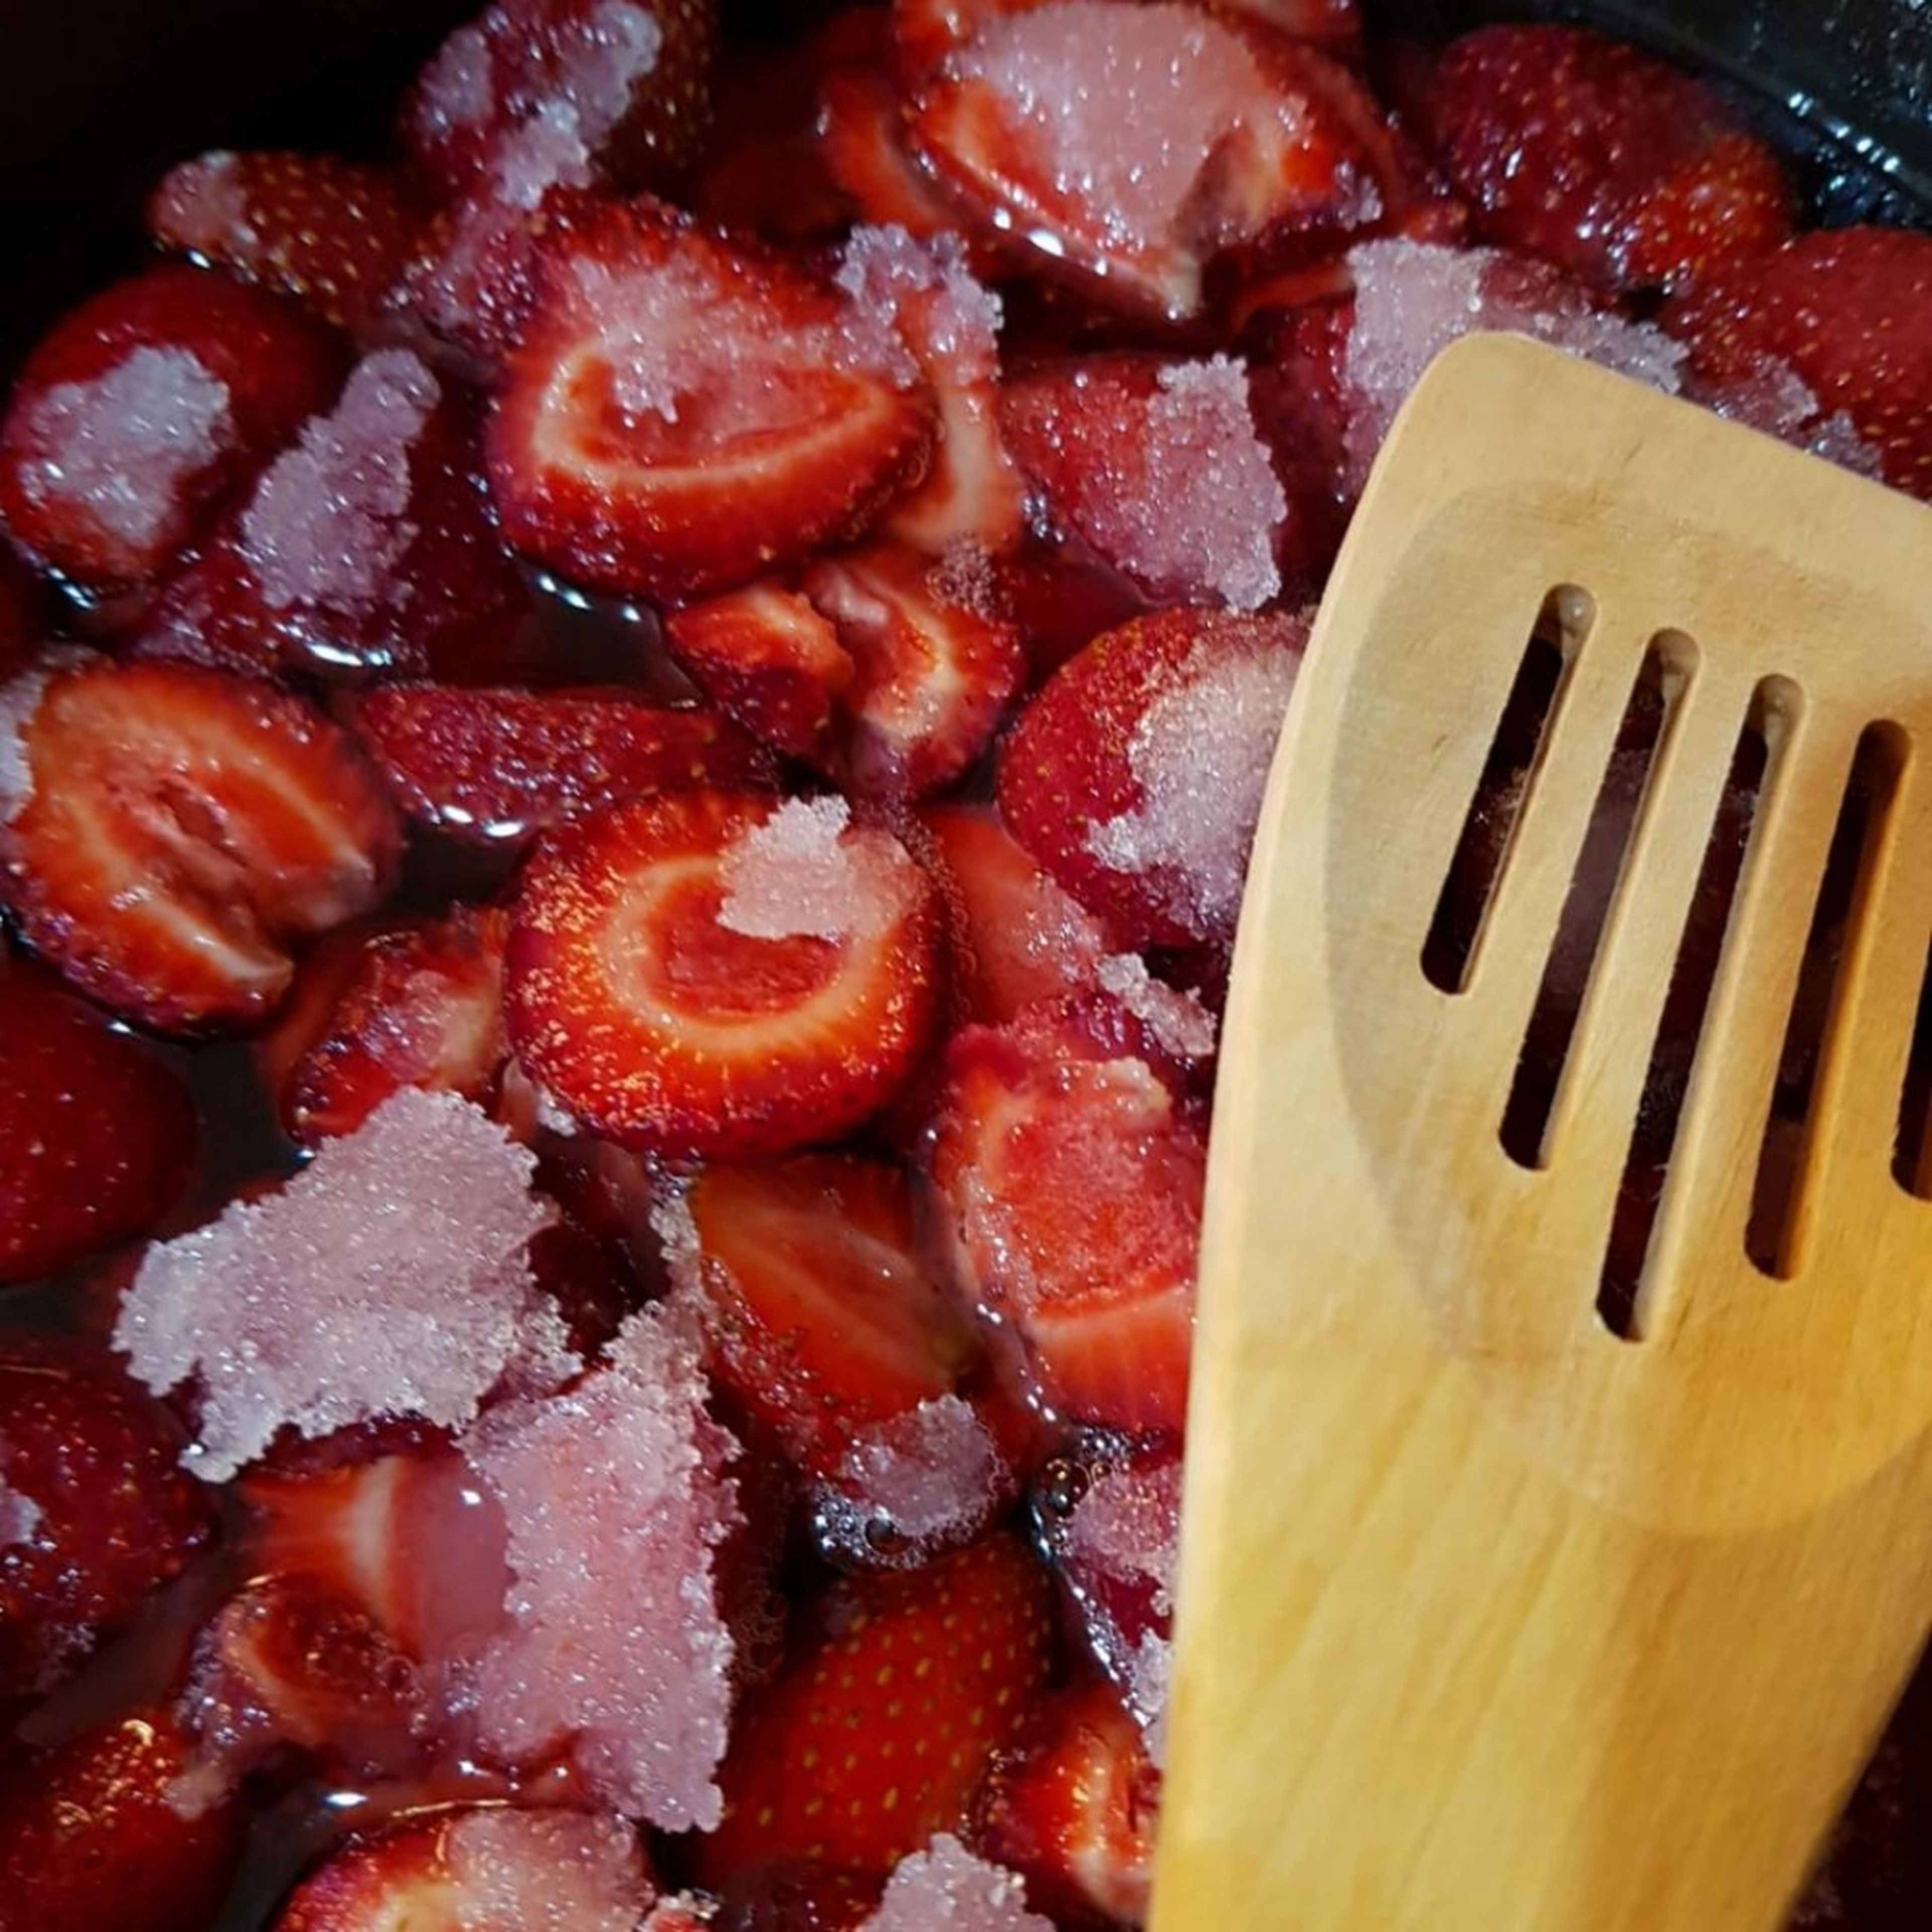 Cover chopped strawberries with the sugar, cover it and leave it in the fridge over the night.